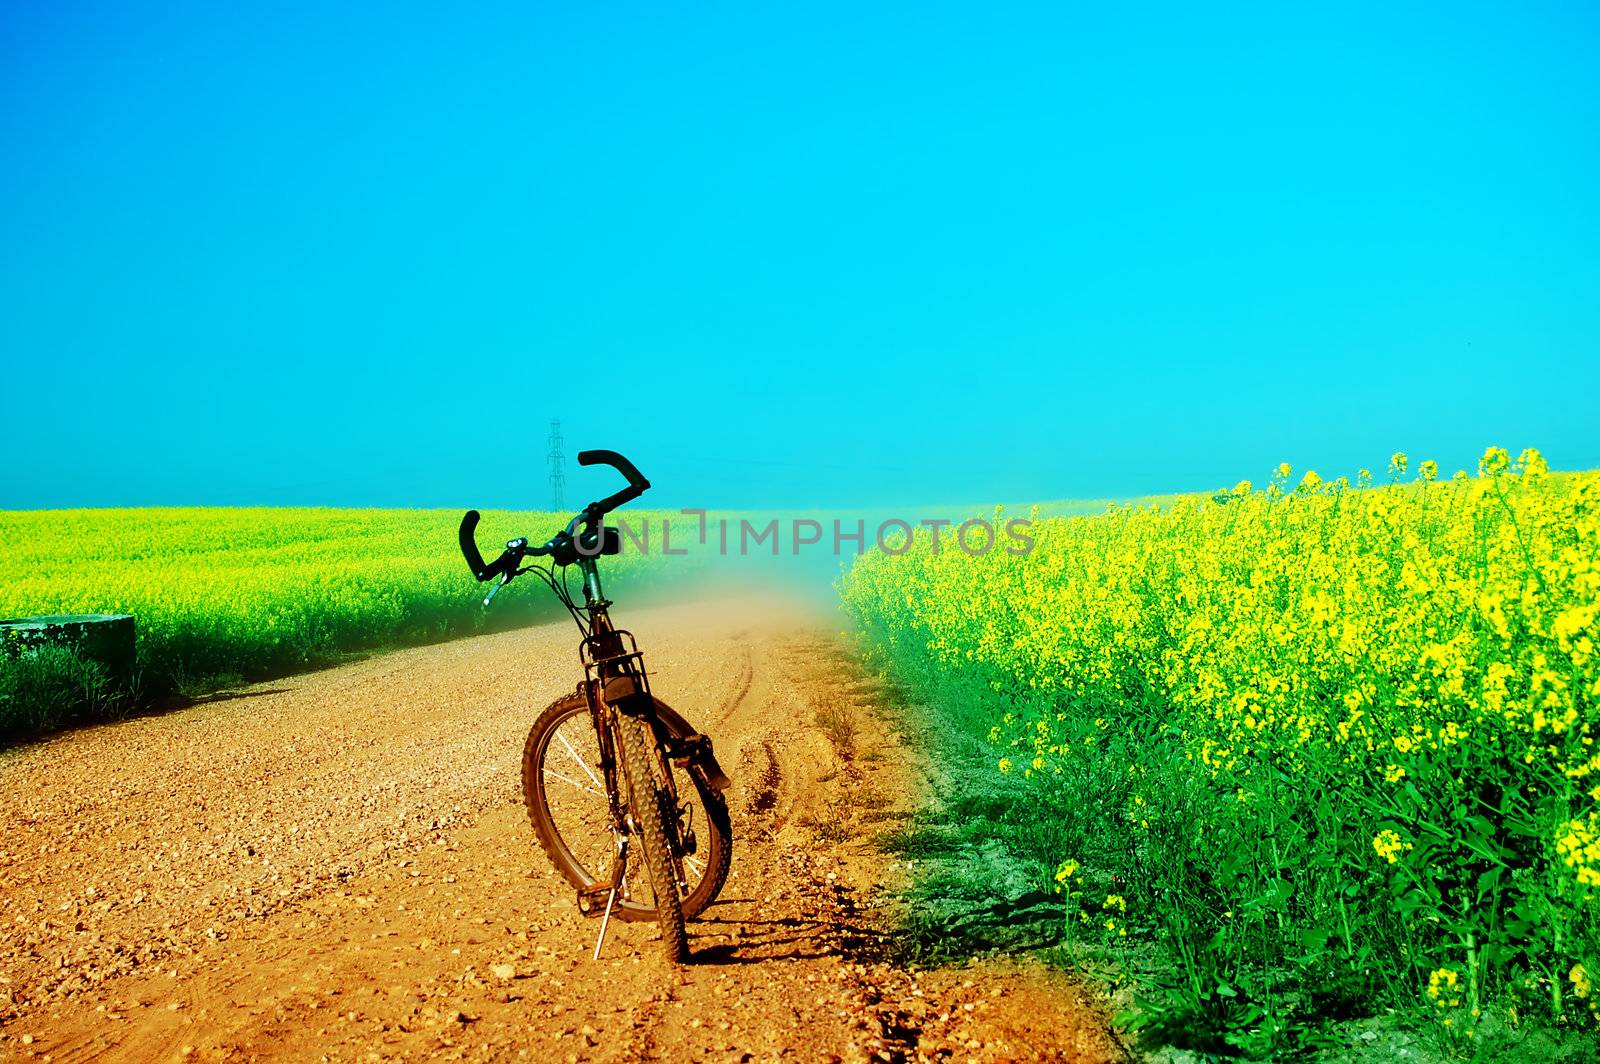 Bicycle at sunny, summer day at field. Copyspace above